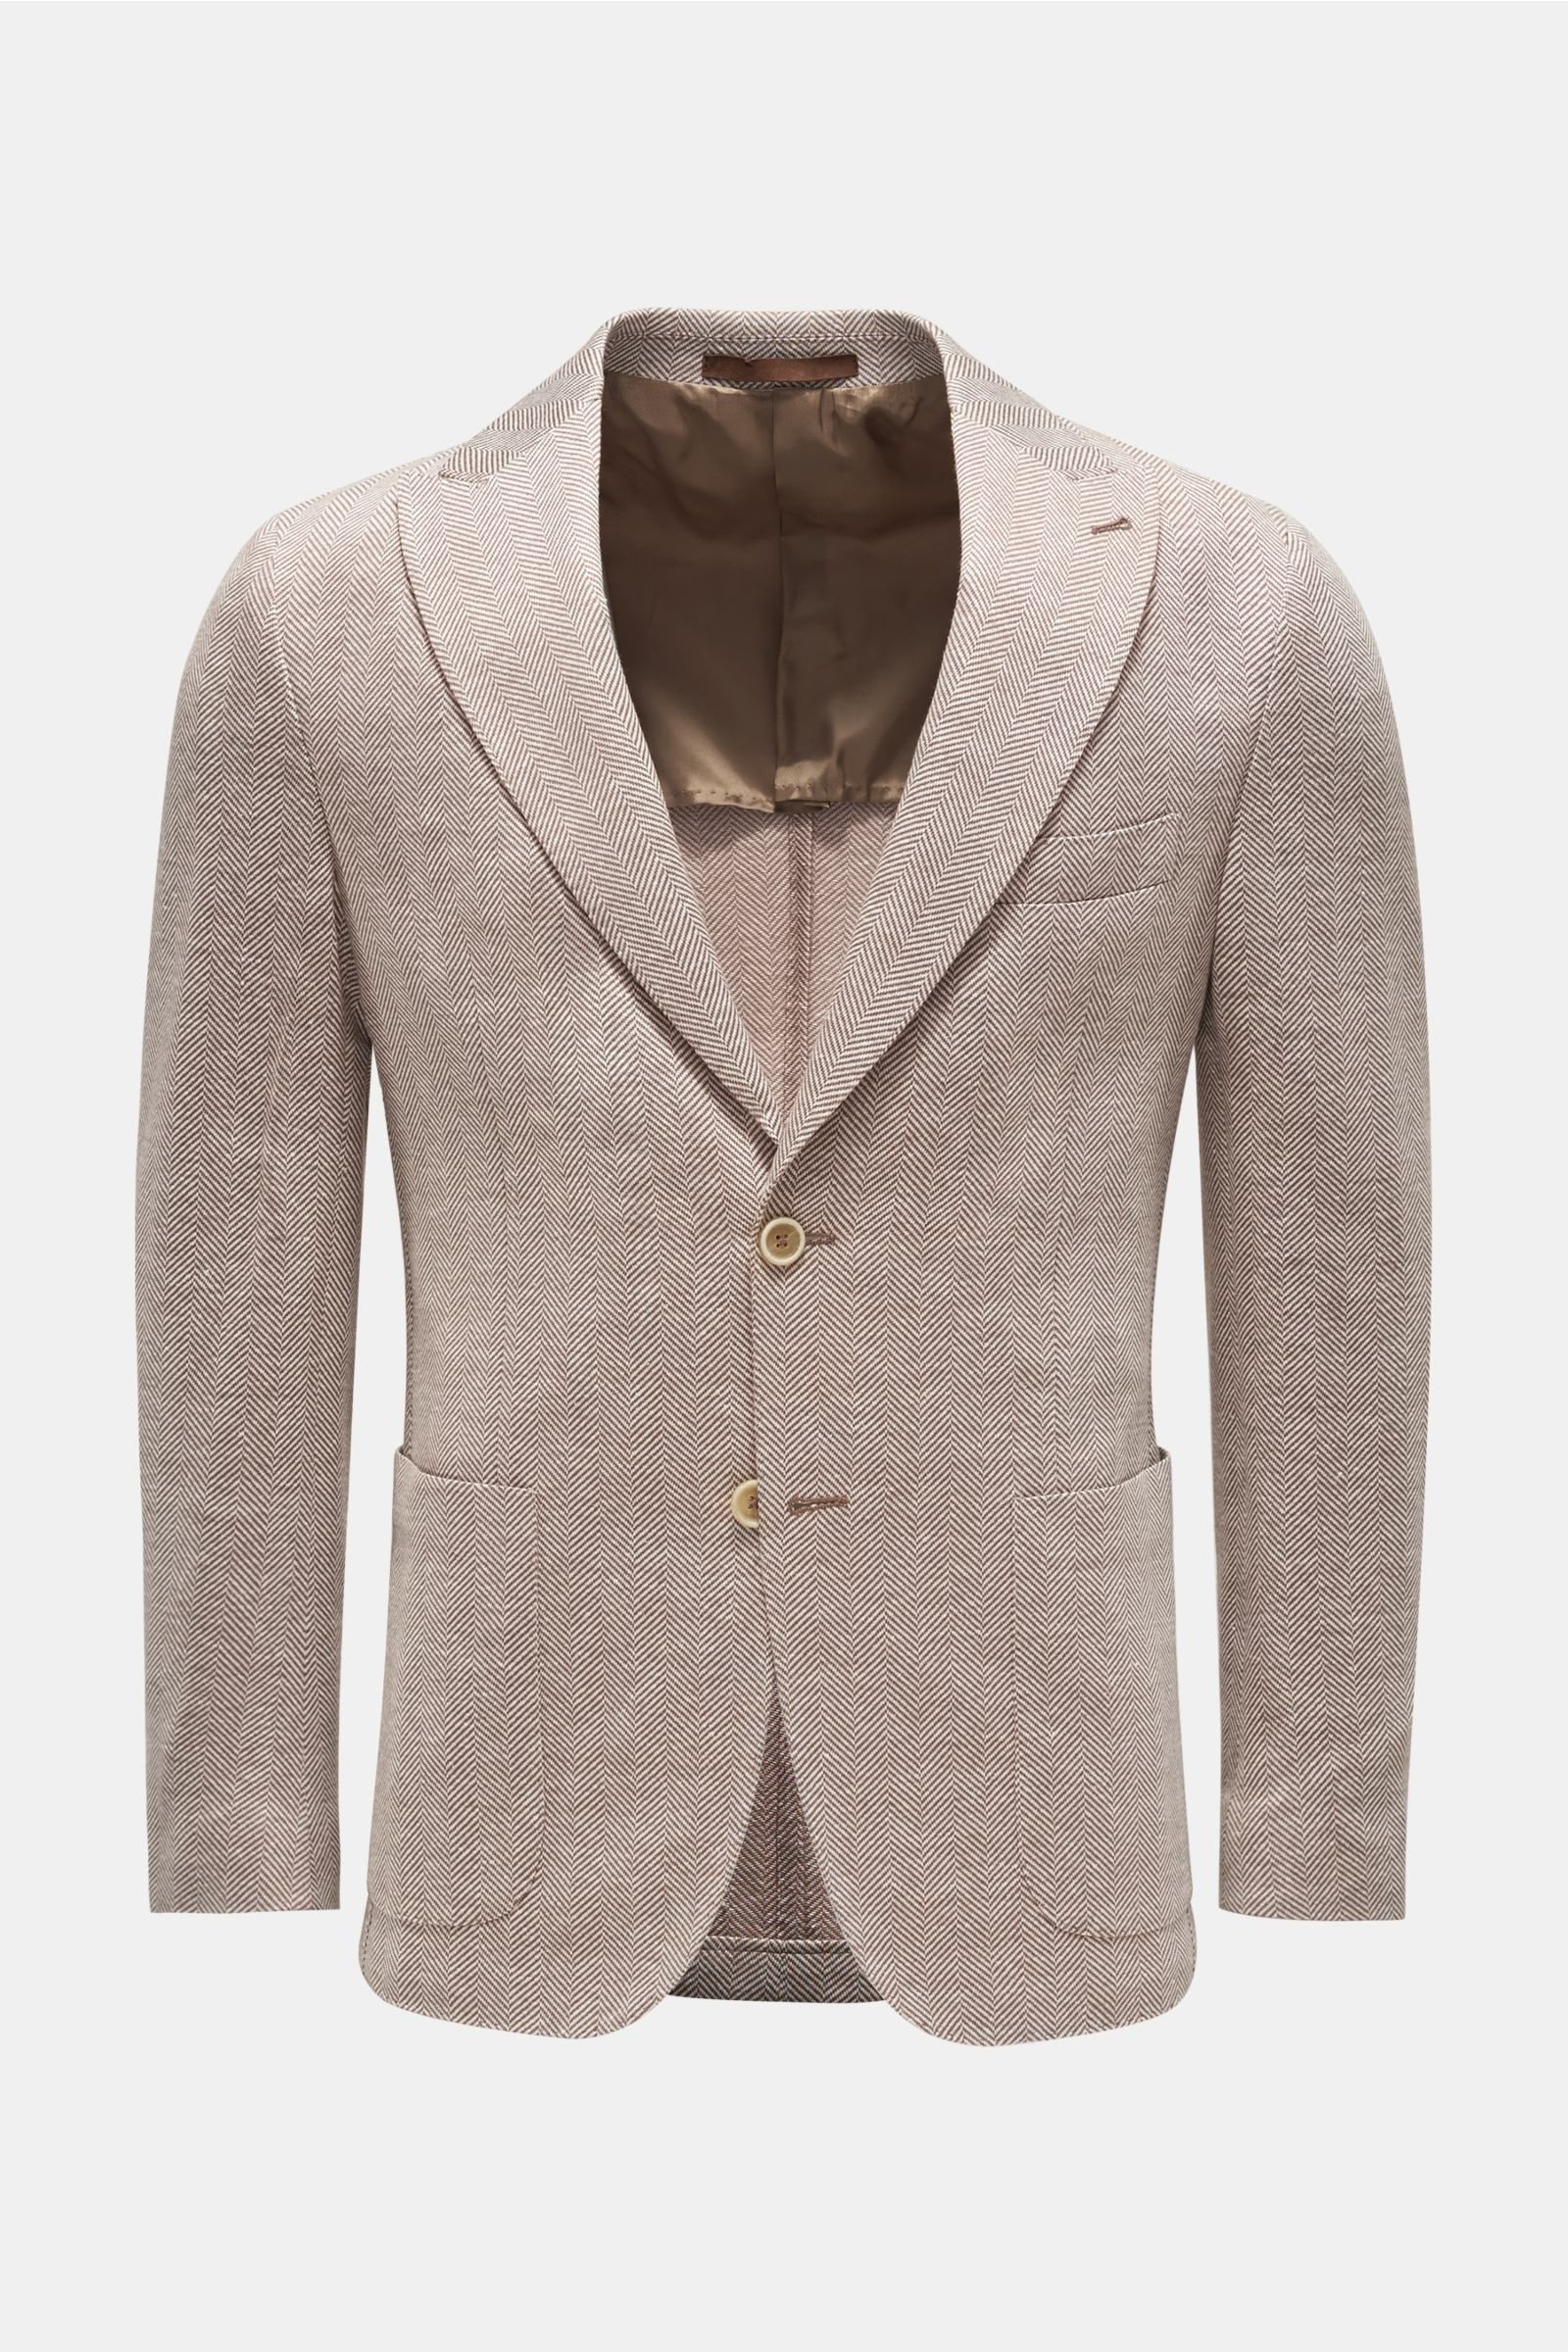 Jersey smart-casual jacket light brown patterned